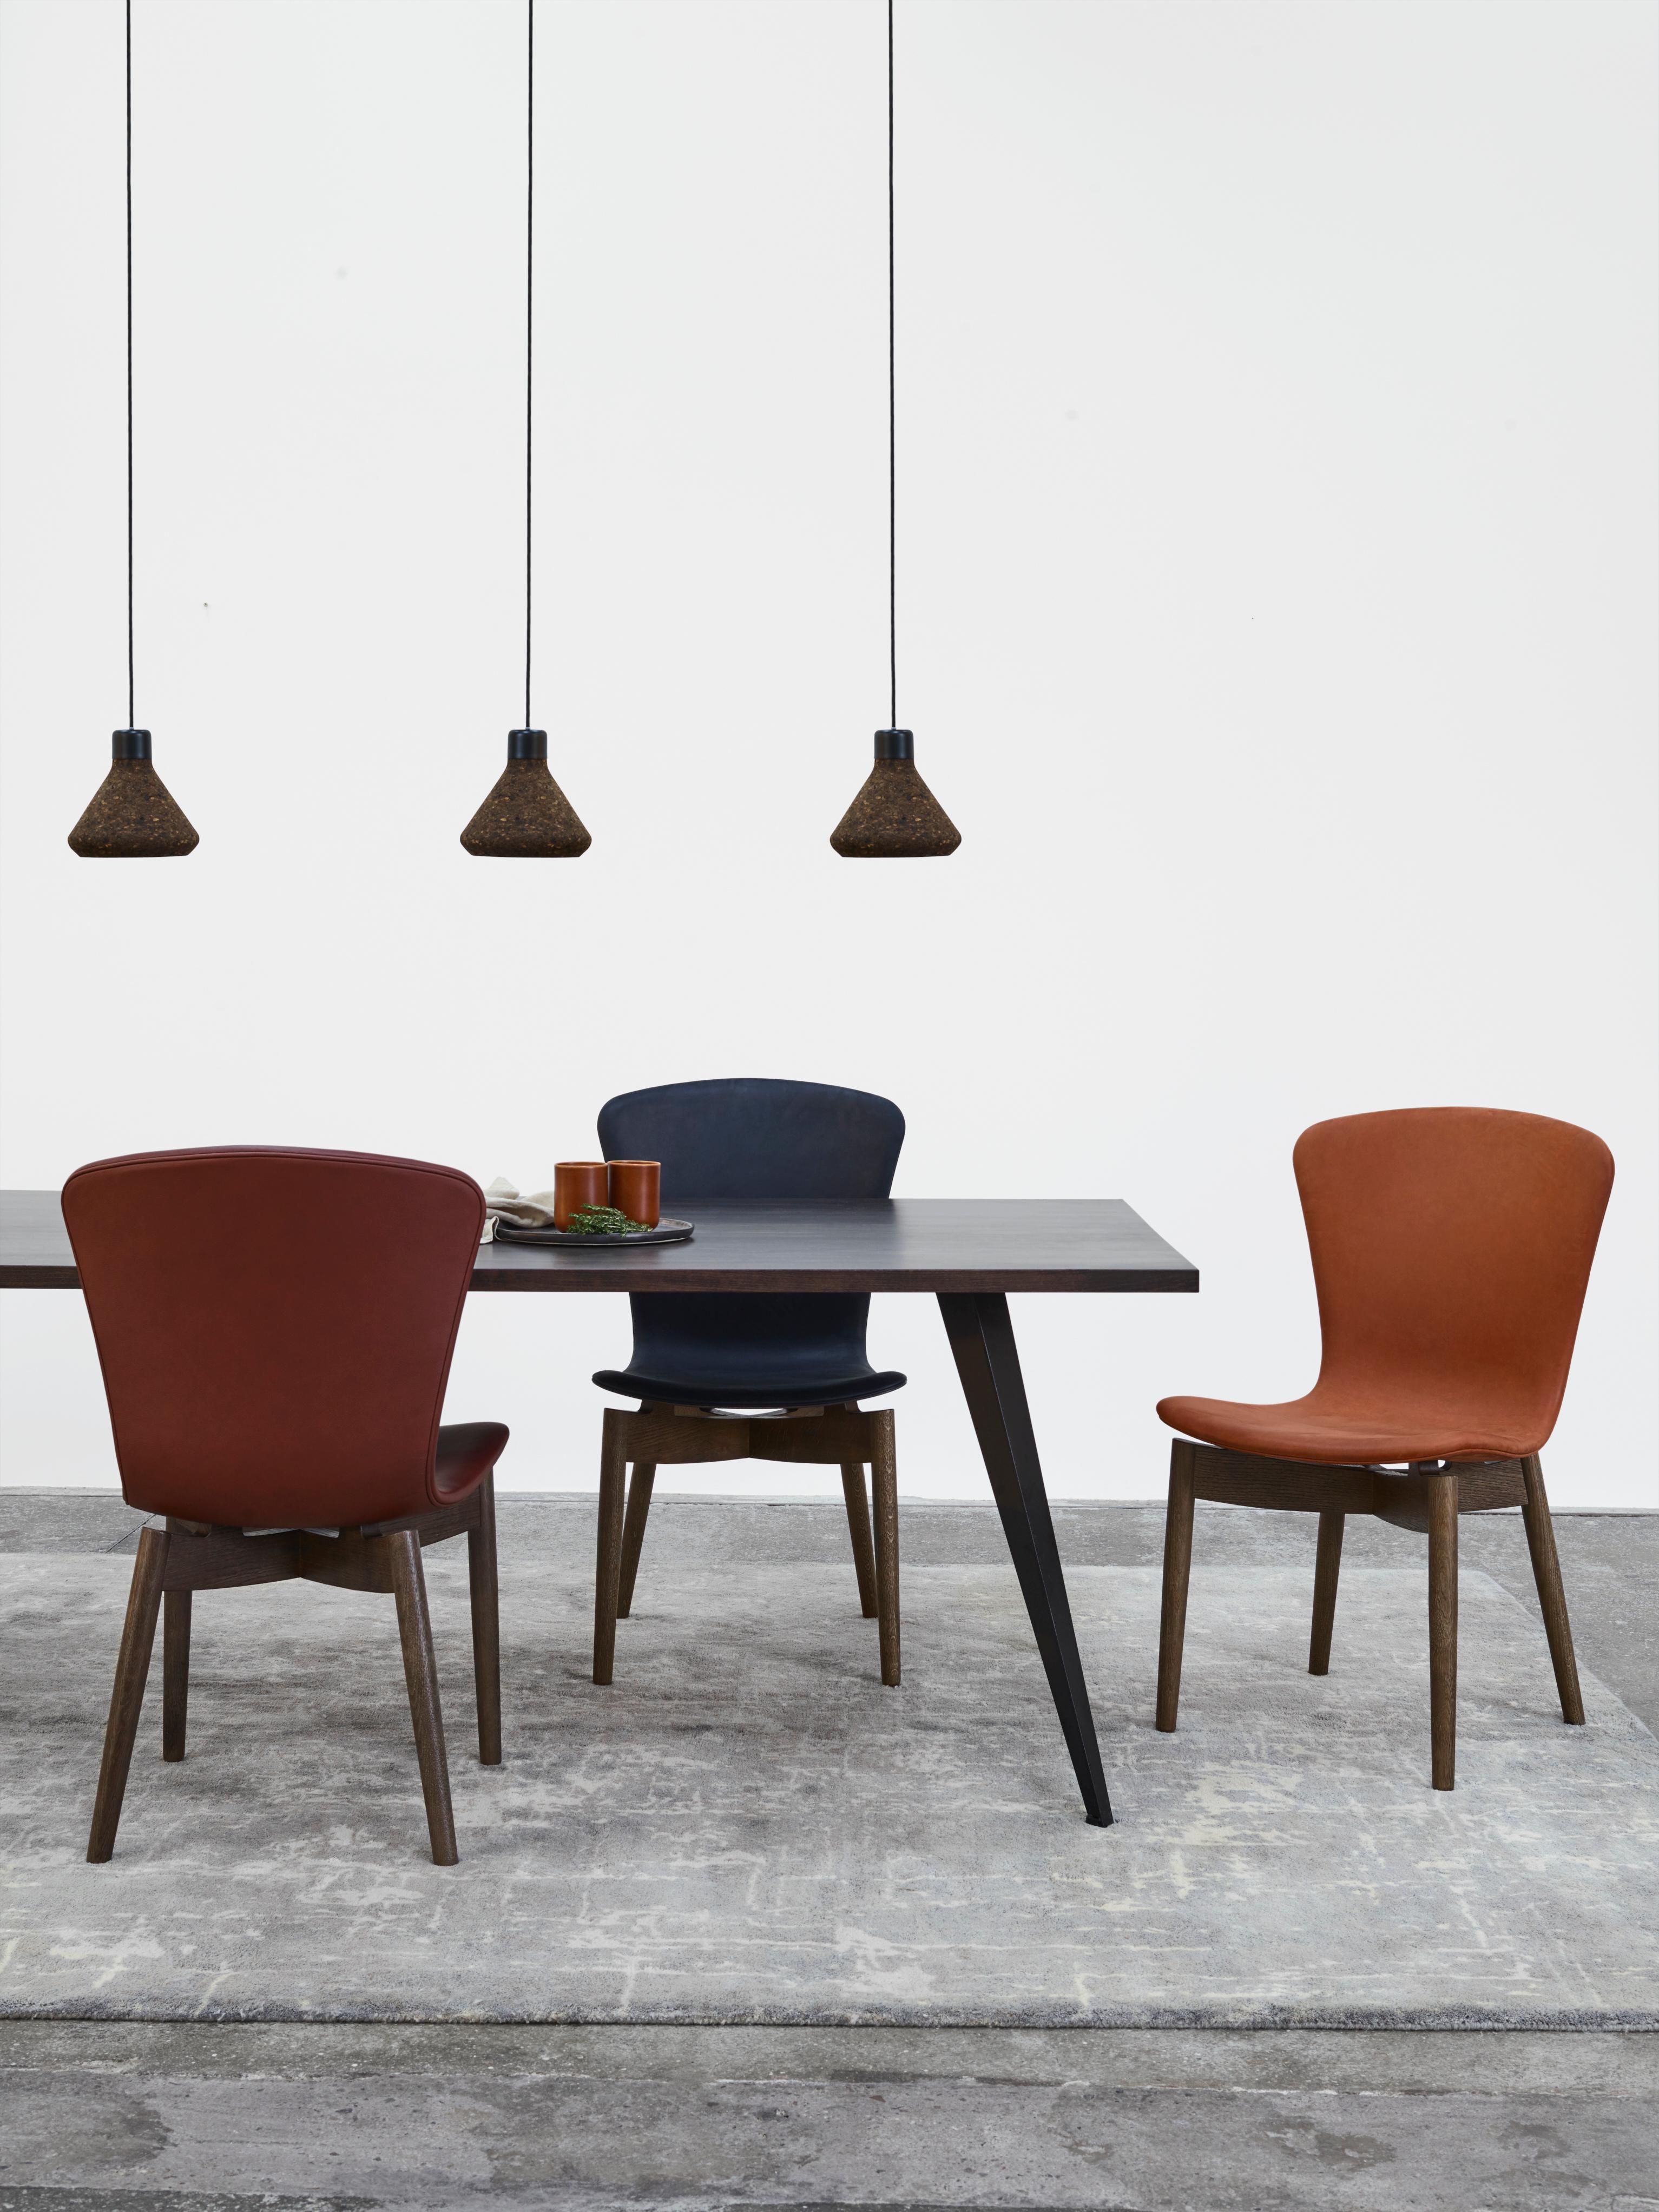 The Mater Shell dining chair is now introduced with a new and softer leather upholstery version of the Mater Shell chair designed by Michael Dreeben. The collaboration with the most recognized Danish leather supplier, Sorensen leathers, is bringing